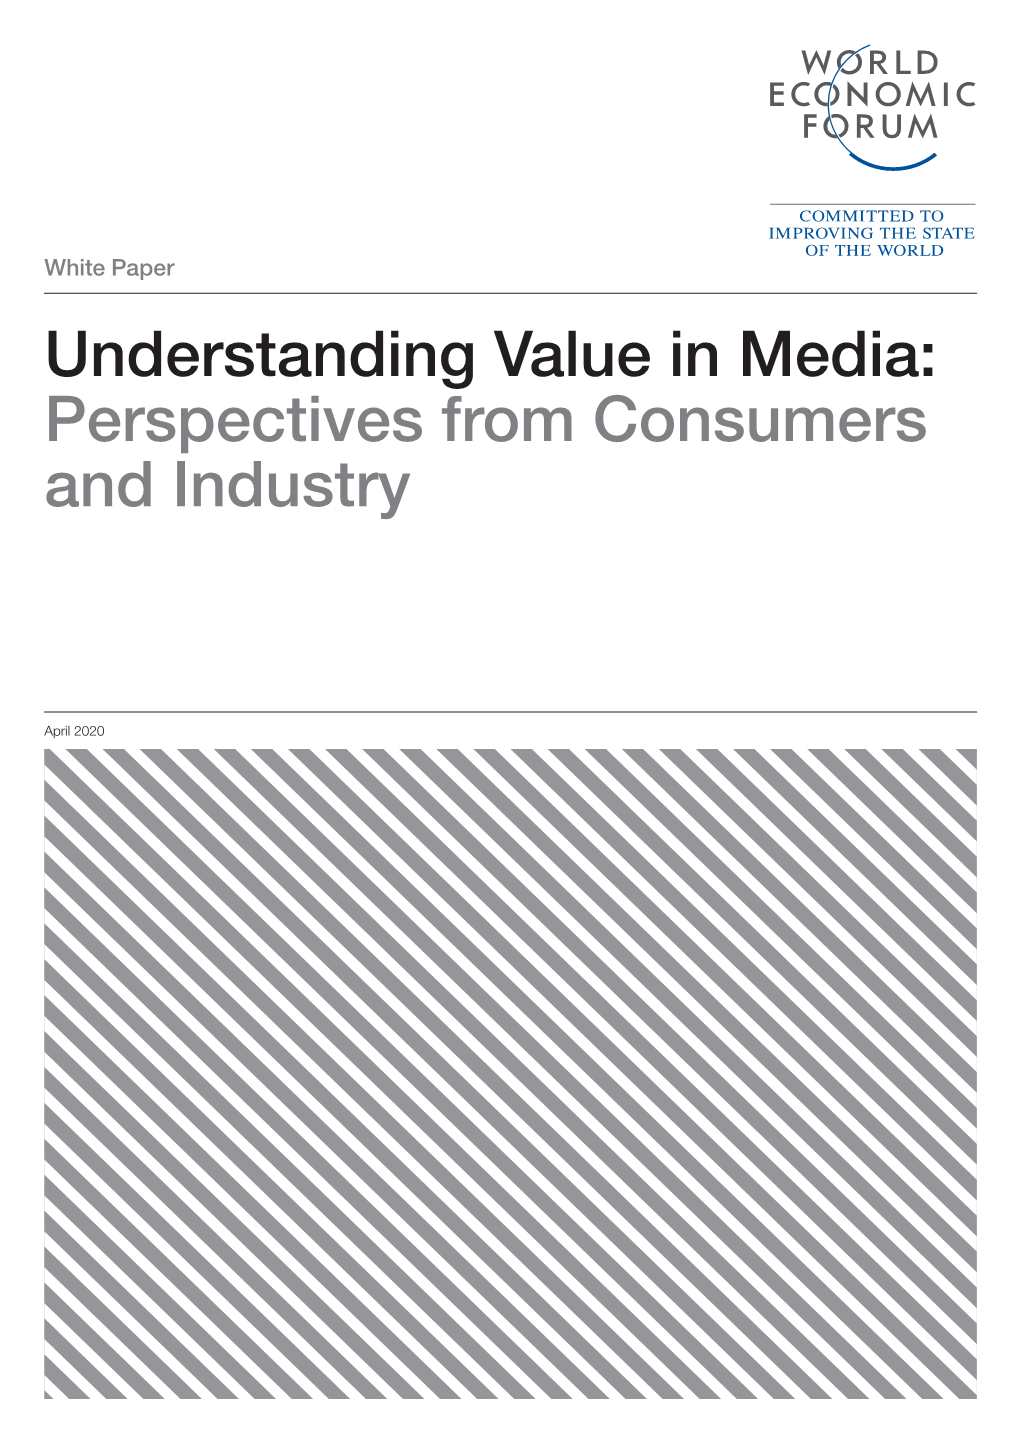 Understanding Value in Media: Perspectives from Consumers and Industry